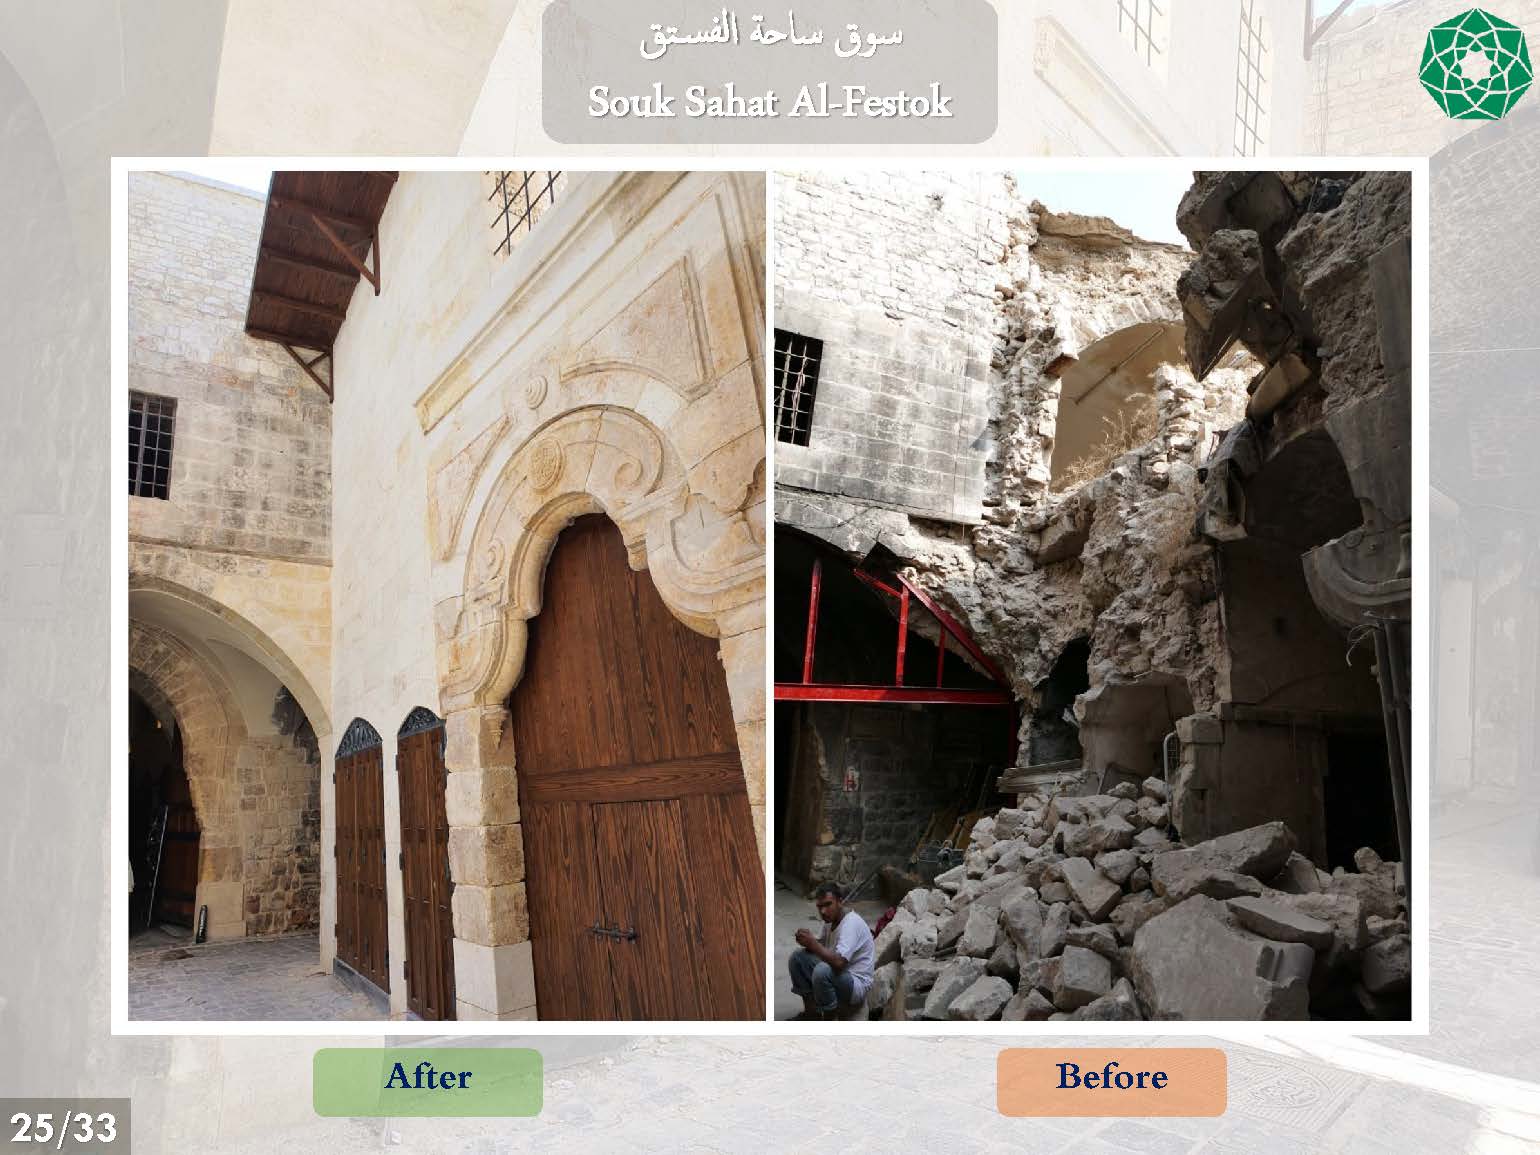 <p>Before and after images showing the extent of the rehabilitation effort (courtyard)</p>